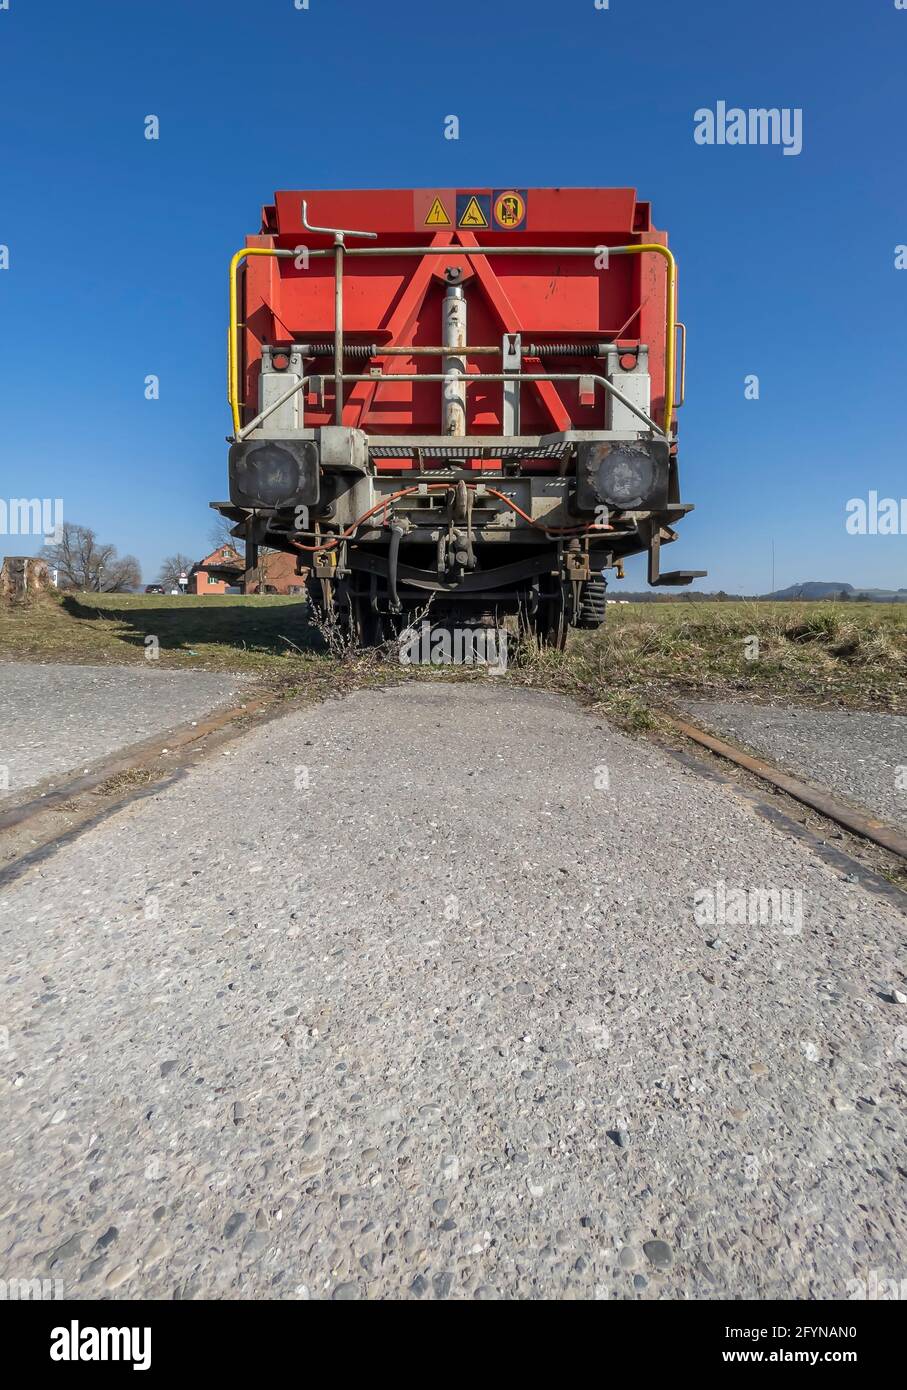 The last wagon of a standing train composition on a track in the middle of a meadow Stock Photo